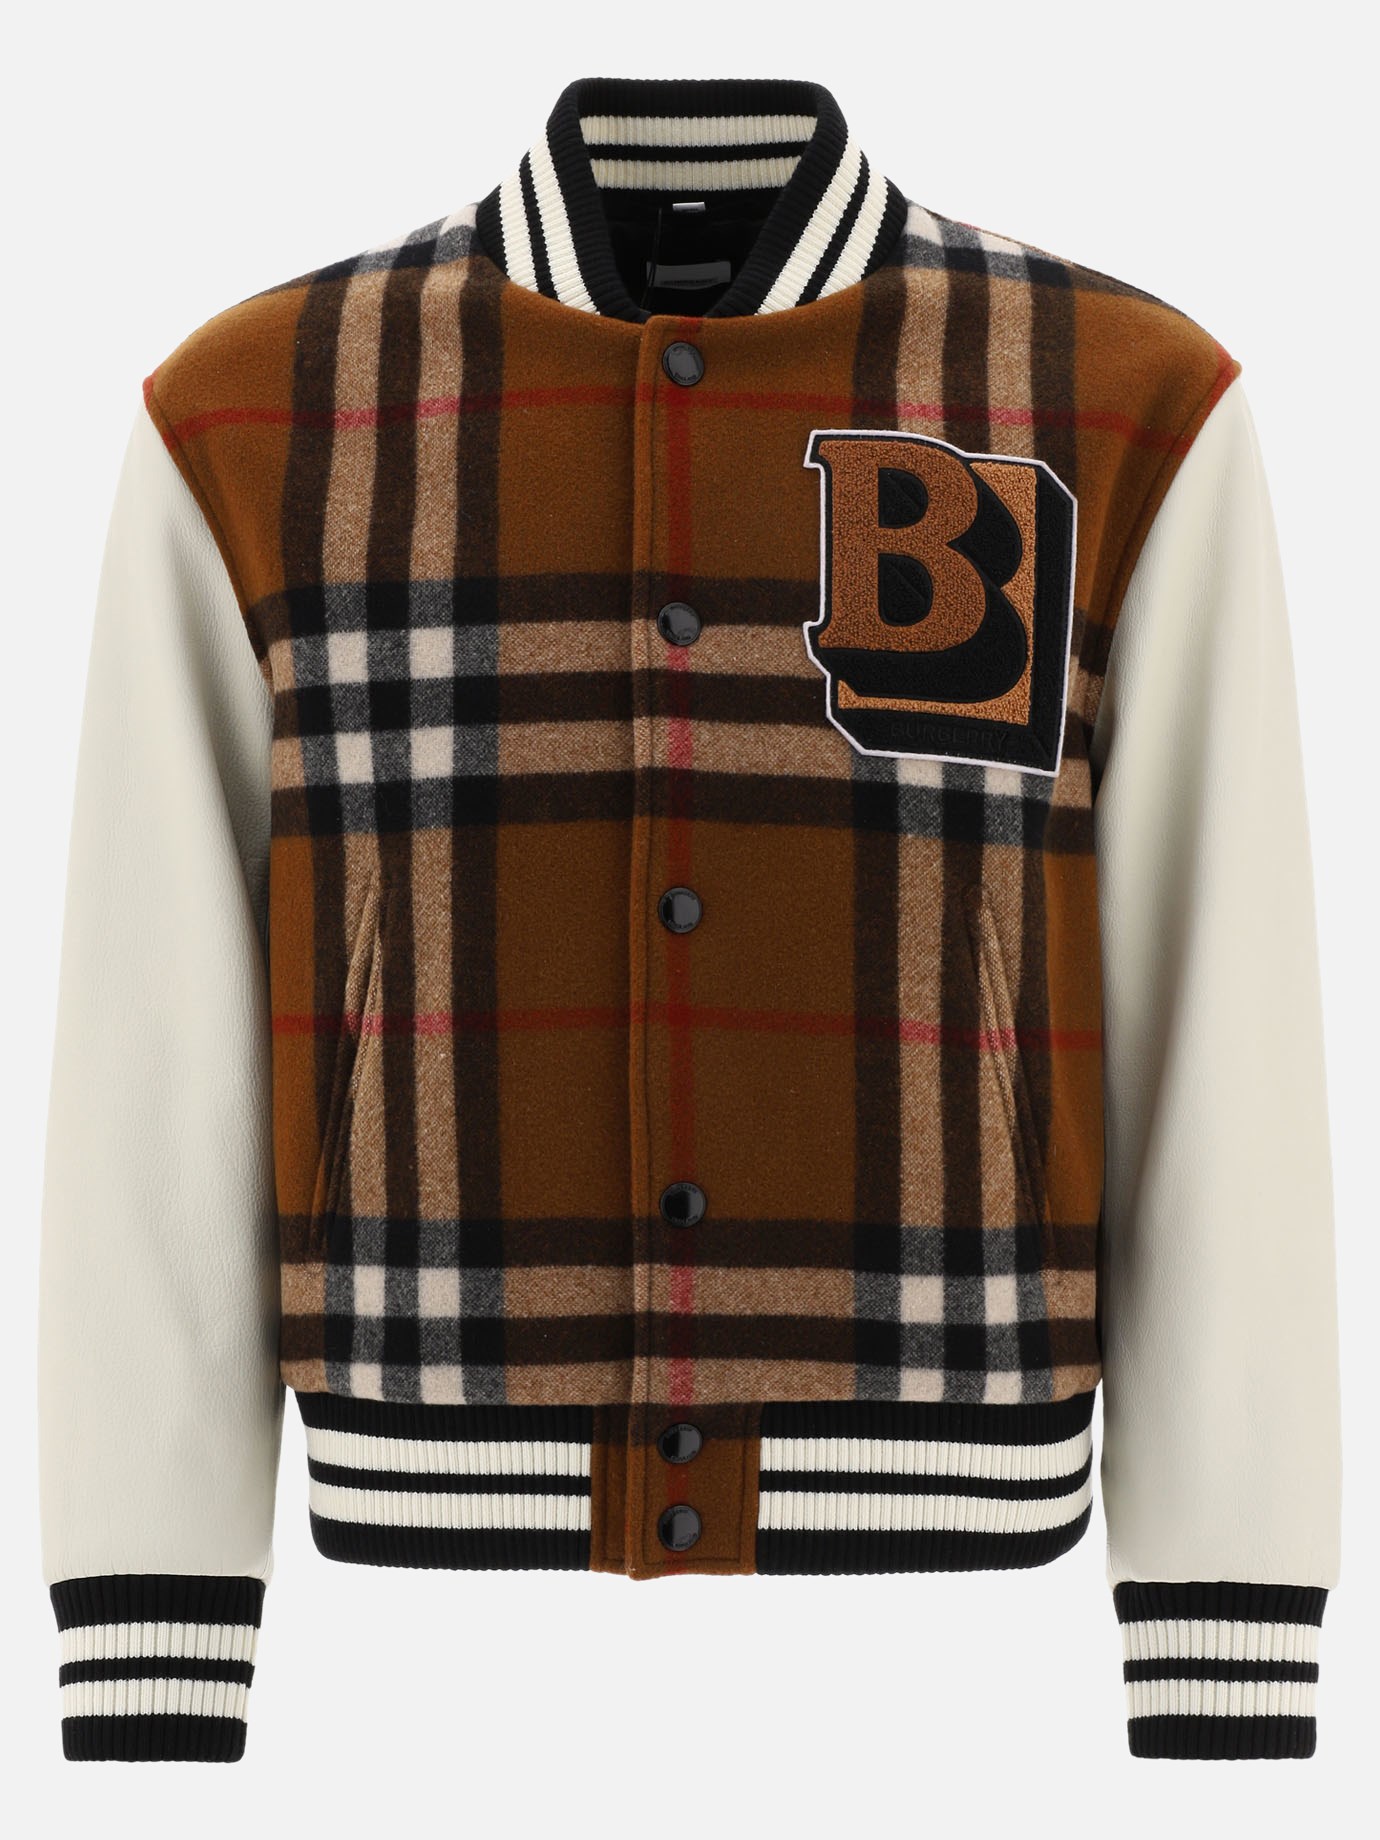  House Check  bomber jacketby Burberry - 1